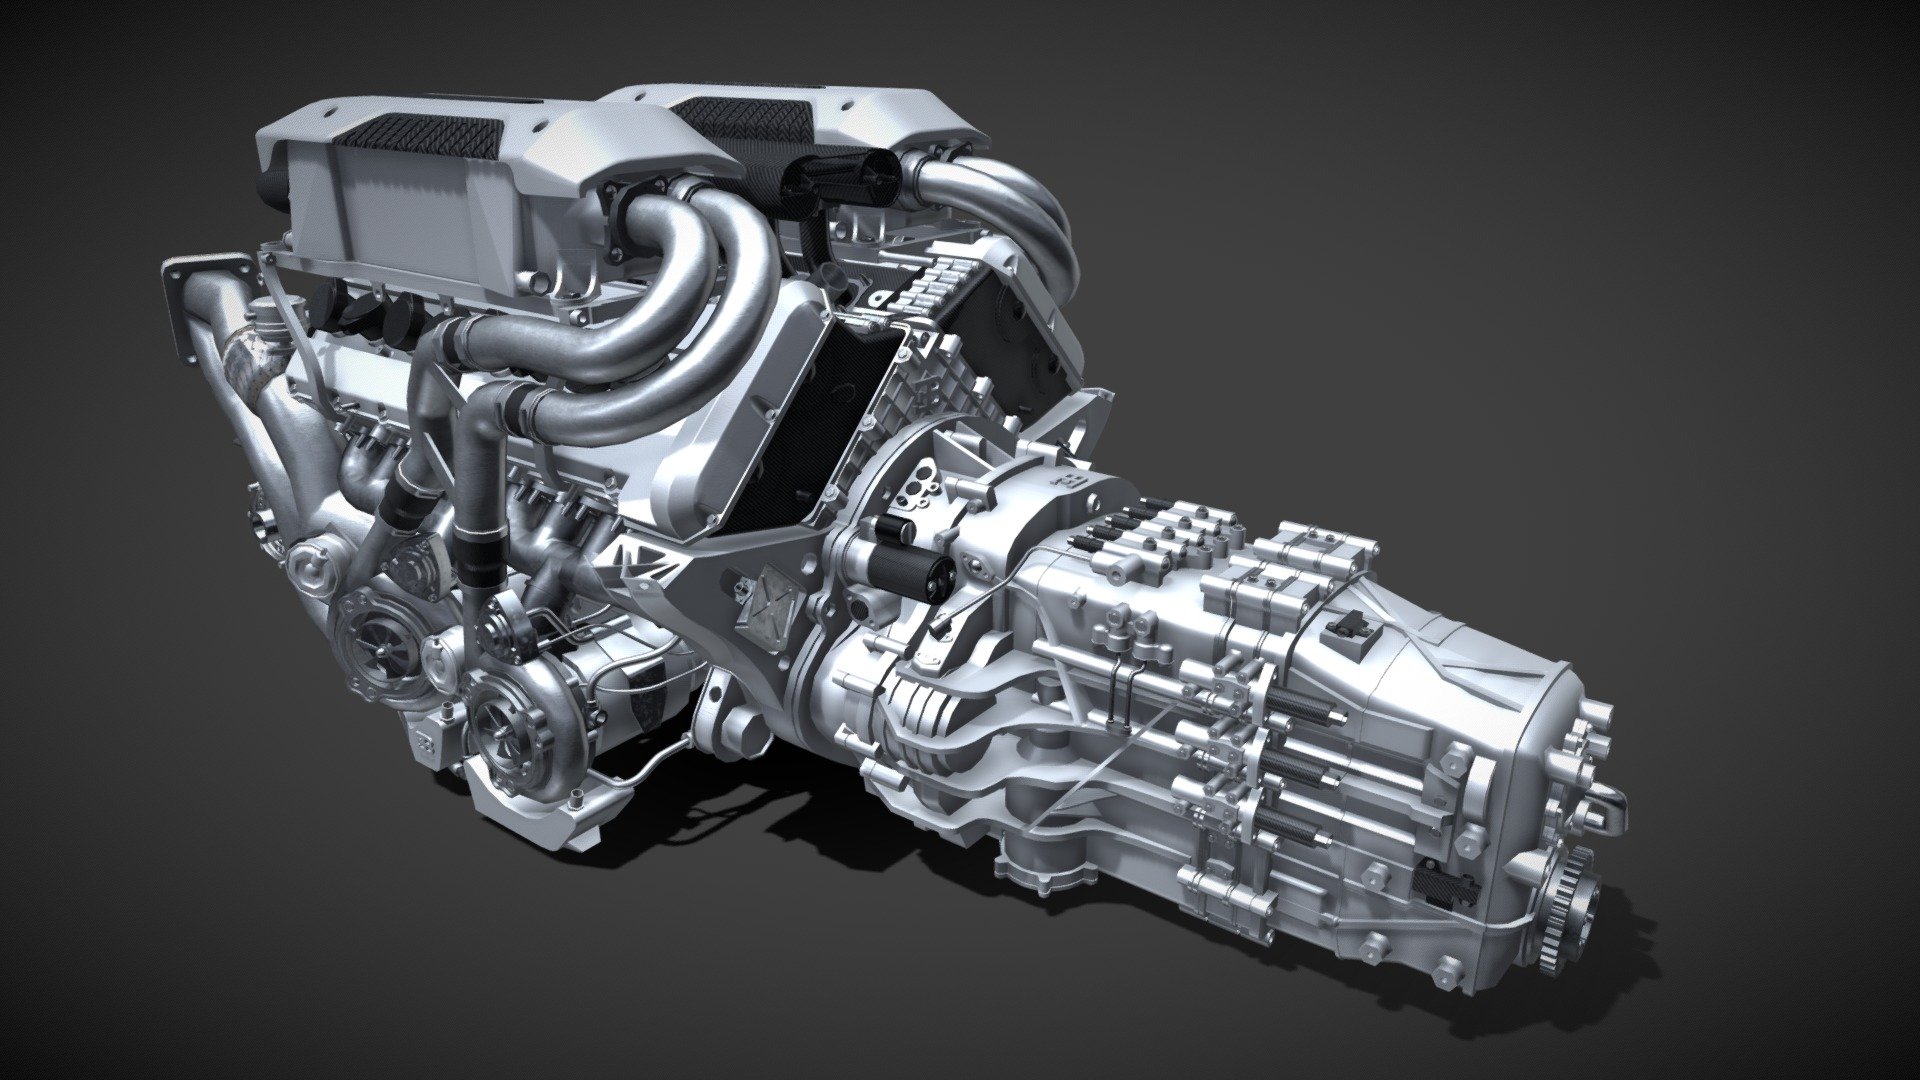 This a model of the W16 of the Bugatti Chiron. 1500 Horsepower, 4 turbos. 
One week of documentation, 2 months of modelisation. Really hope you like it ! 
This engine is the one used by all Bugatti for years (Divo, Bolide, etc)

More information about the project here : https://www.behance.net/gallery/88466715/Bugatti-Chiron-Engine

The hole engine can be subdivided. With the subdivision activated you can have close renderings to an extreme quality. The engine is animated.

High definition textures. Ready to render. -No N-gones (less than 1%) -No Isolated vertices -No Overlapping Faces -No Overlapping vertices -No Flipped Normals High quality fast render. Subdivision ready. UV unfolded.
I made the 3D model from photos, so there may be some small errors 3d model